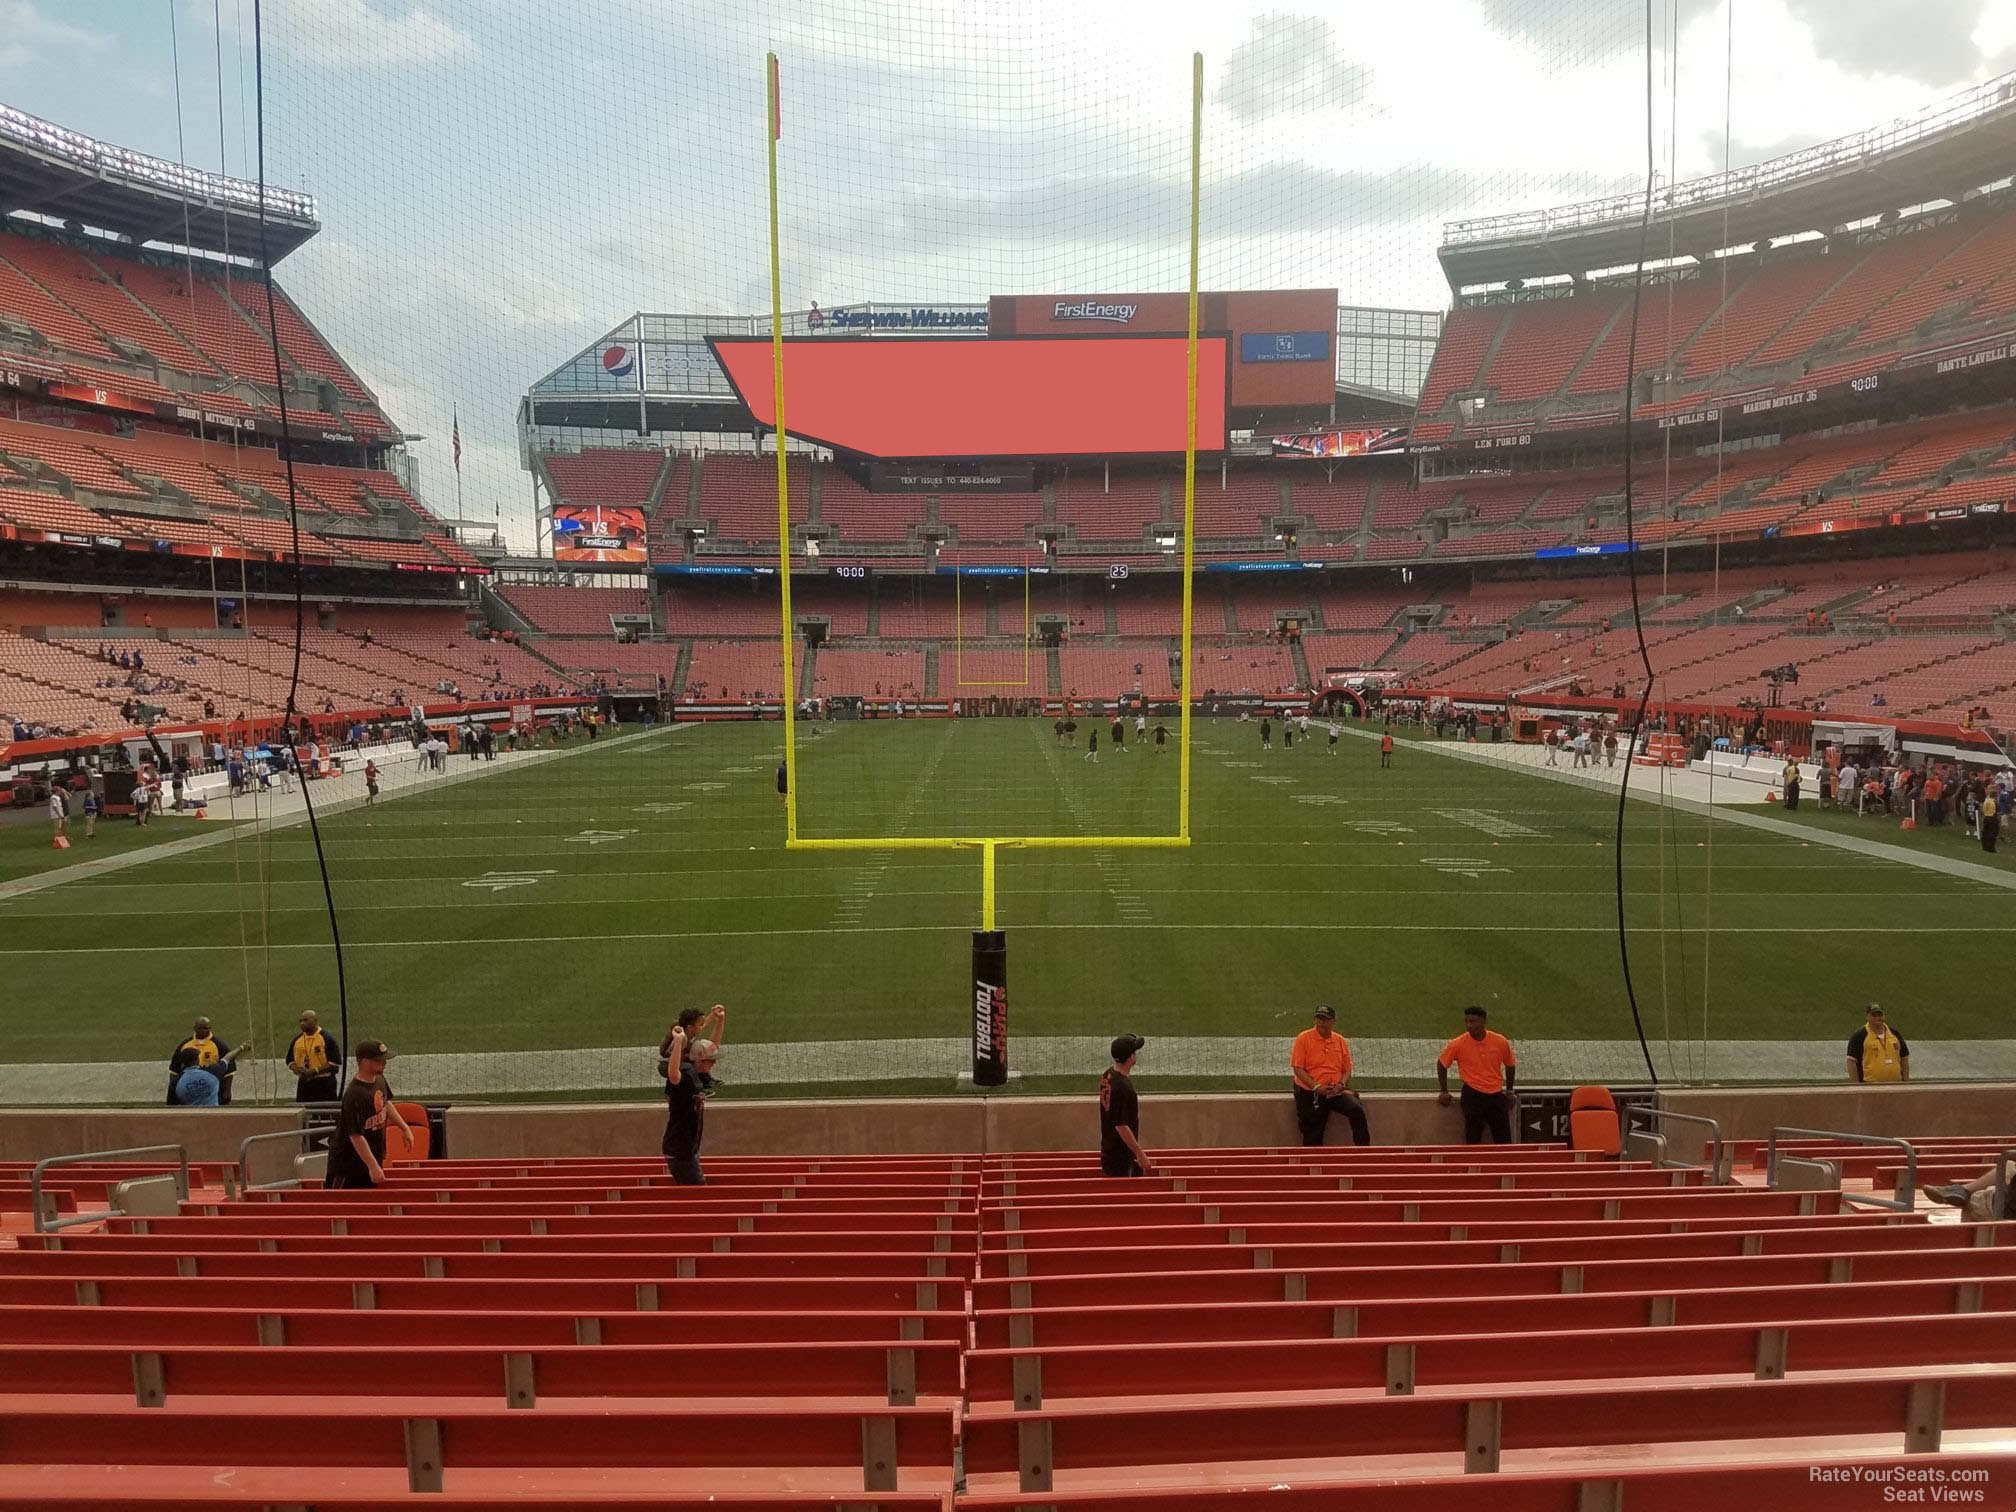 section 120, row 17 seat view  - cleveland browns stadium